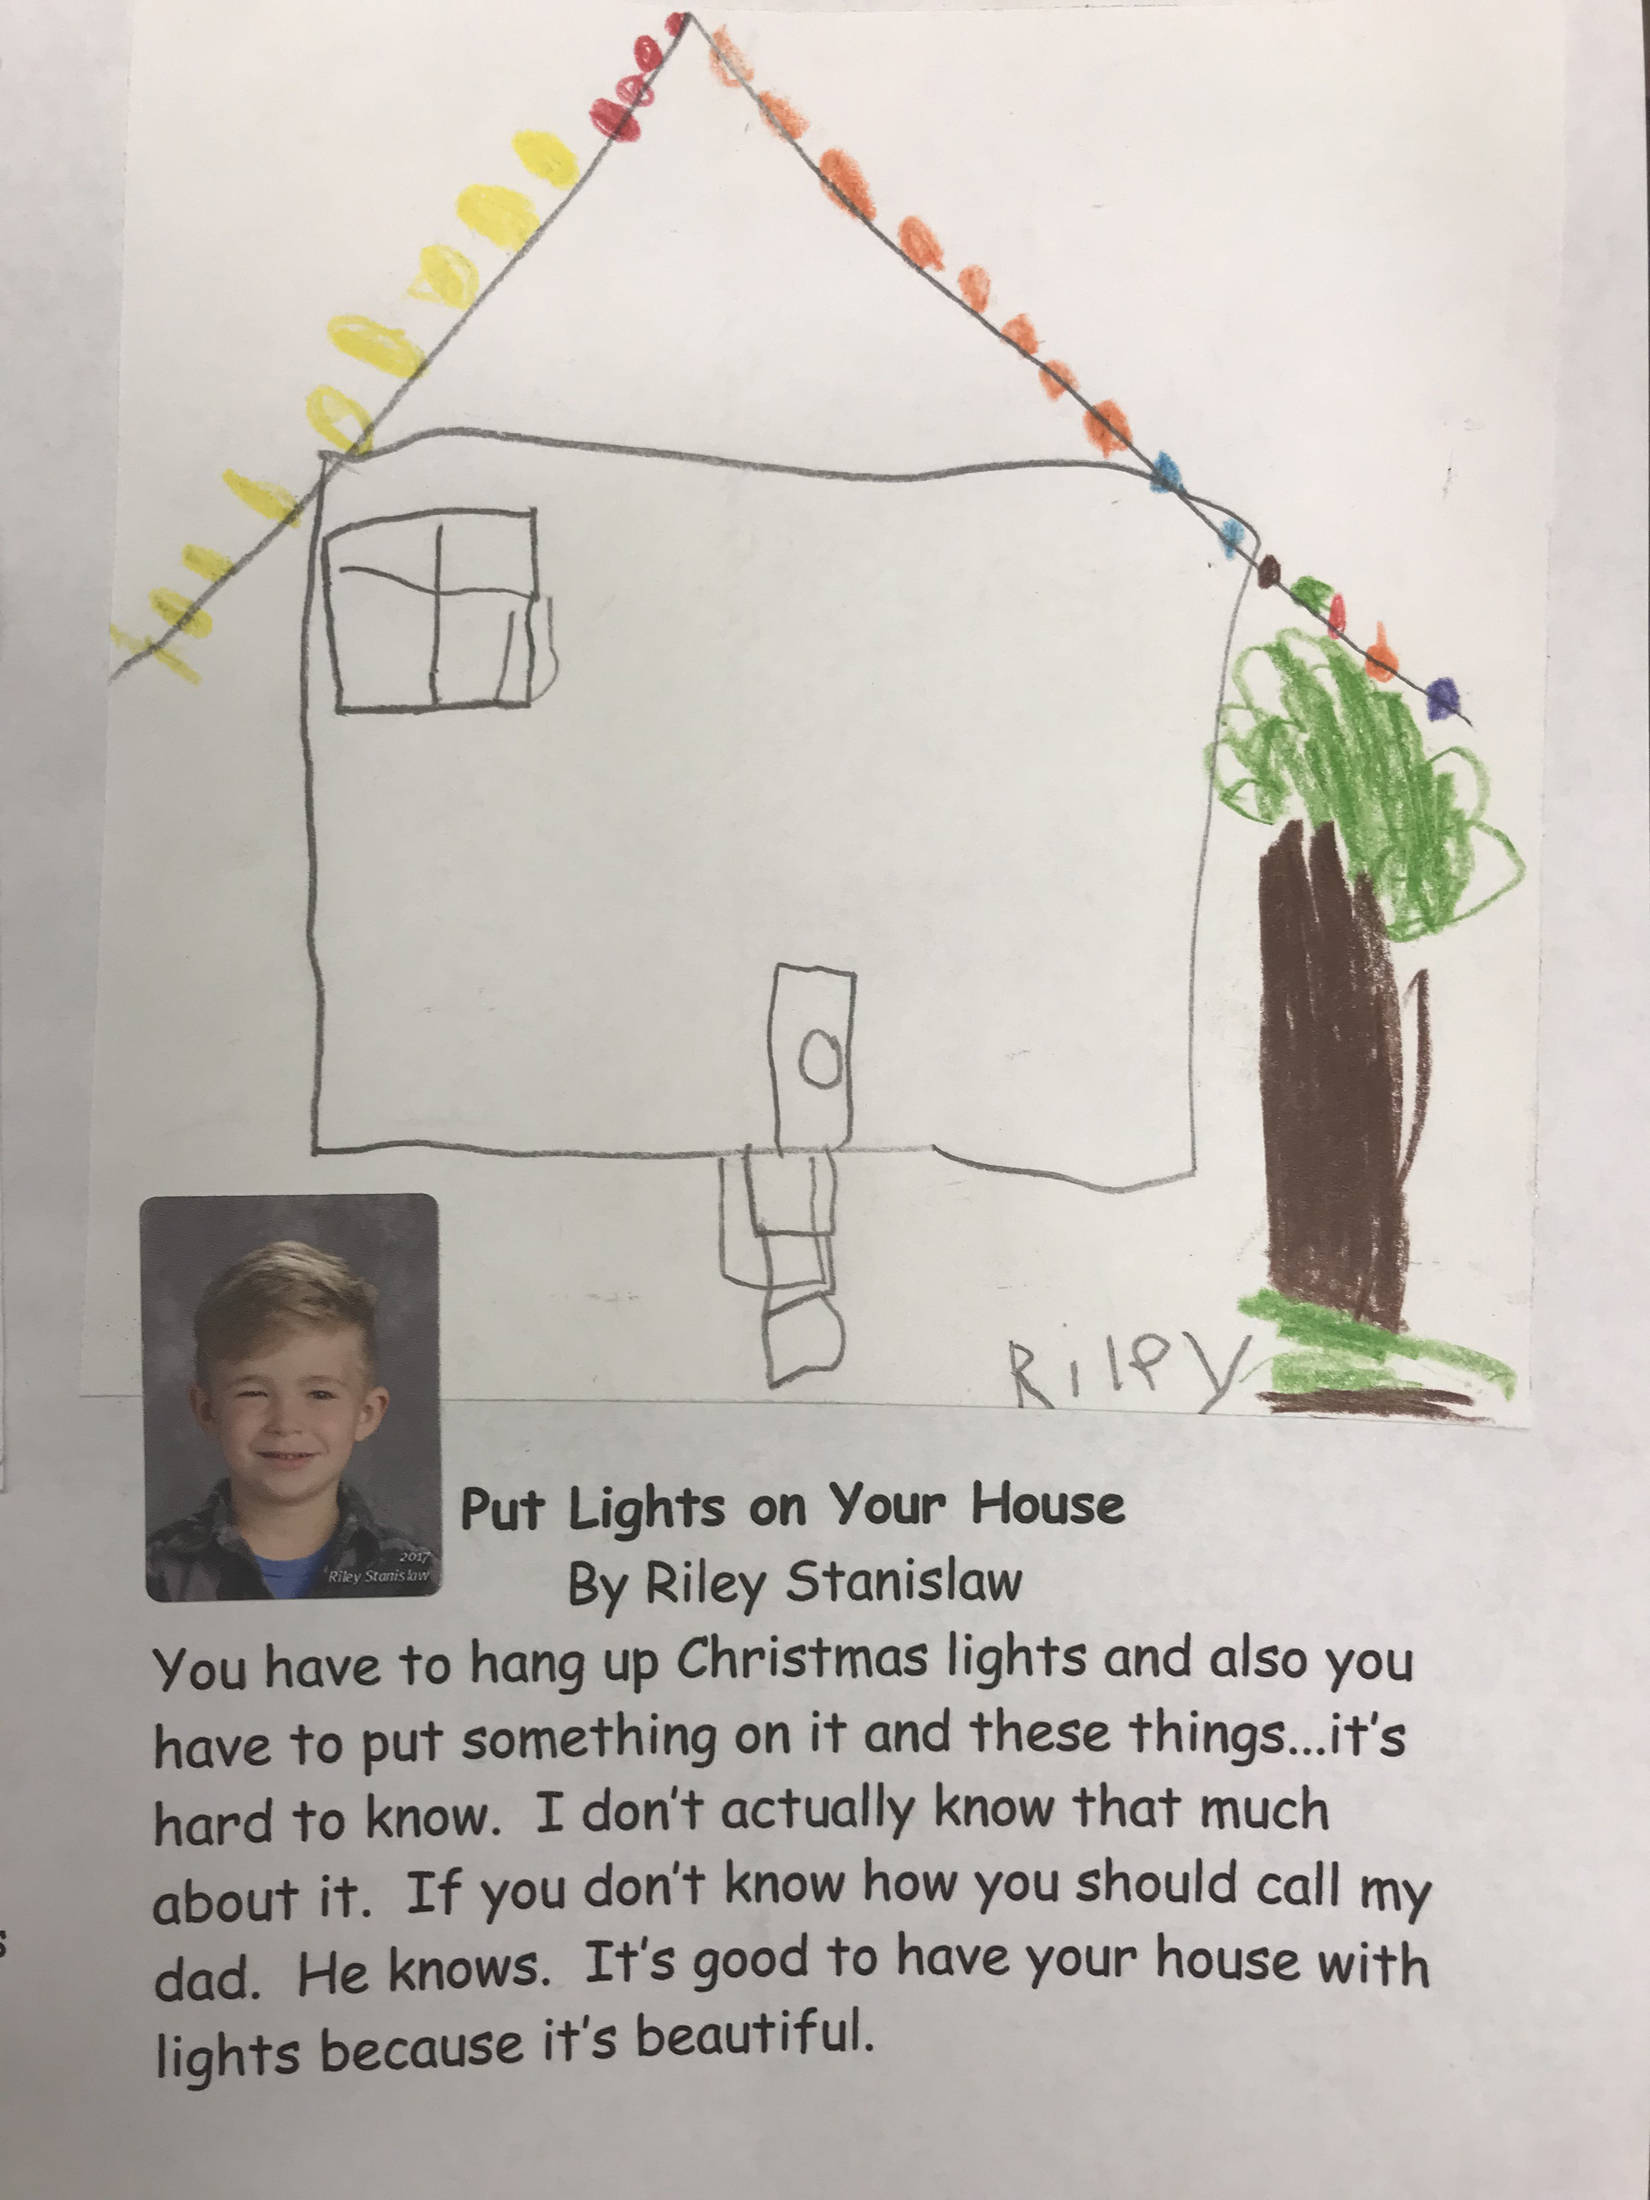 This holiday instruction made by Riley Stanislaw is part of an 18-page “How to Get Ready for the Holidays” book created by the students of Jennifer Reinhart’s kindergarten class. (Photo courtesy Jennifer Reinhart)